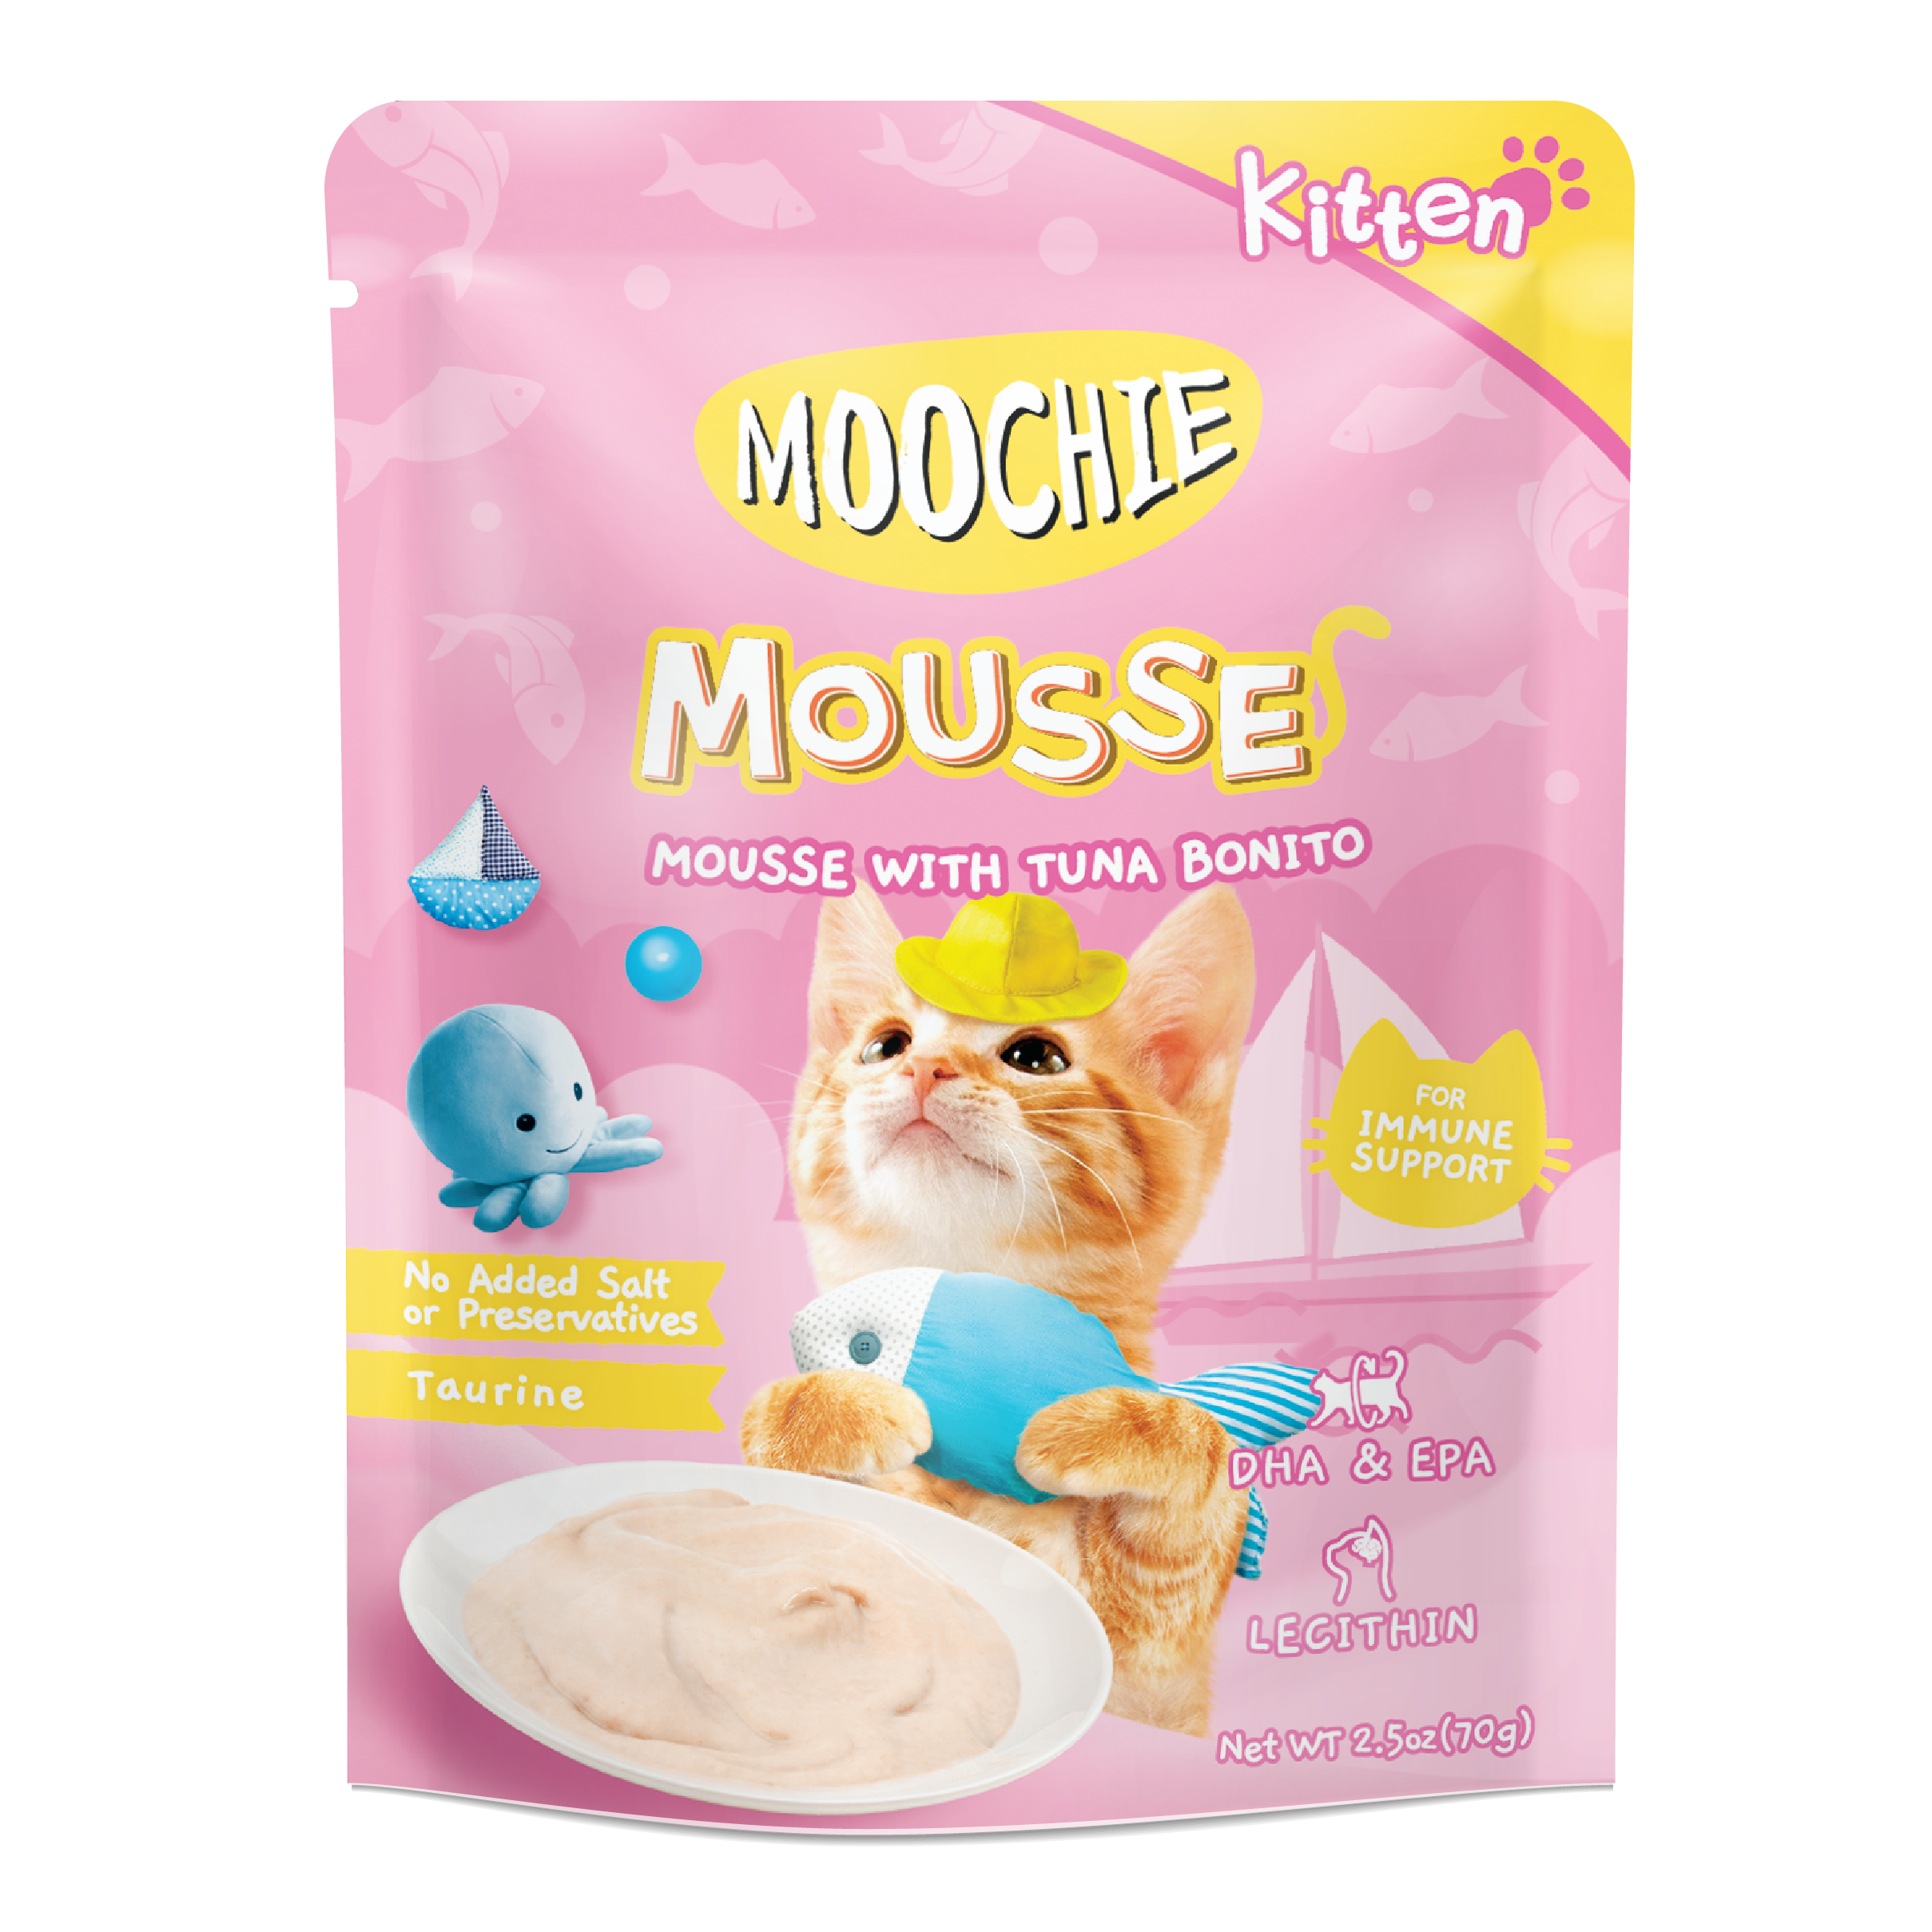 MOOCHIE KITTEN MOUSSE WITH TUNA BONITO 70g Pouch